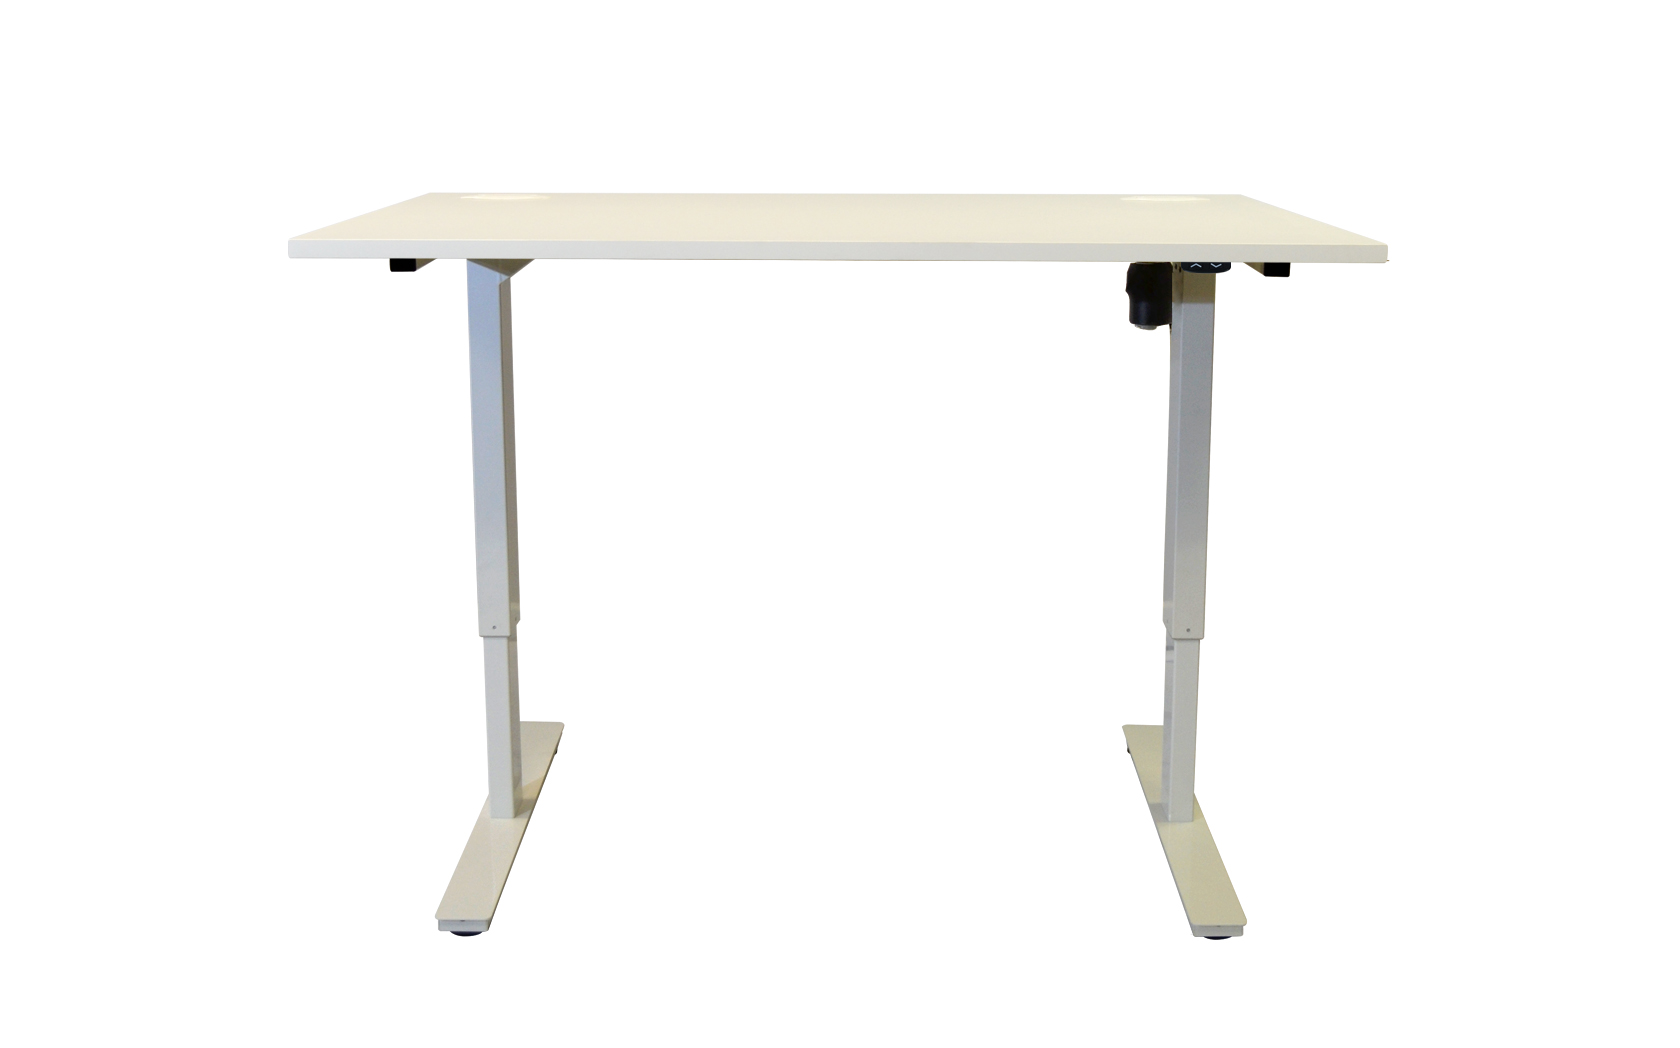  Electric Height Adjustable Sit Stand Desk  White Top ,  Black  leg  various sizes and finishes